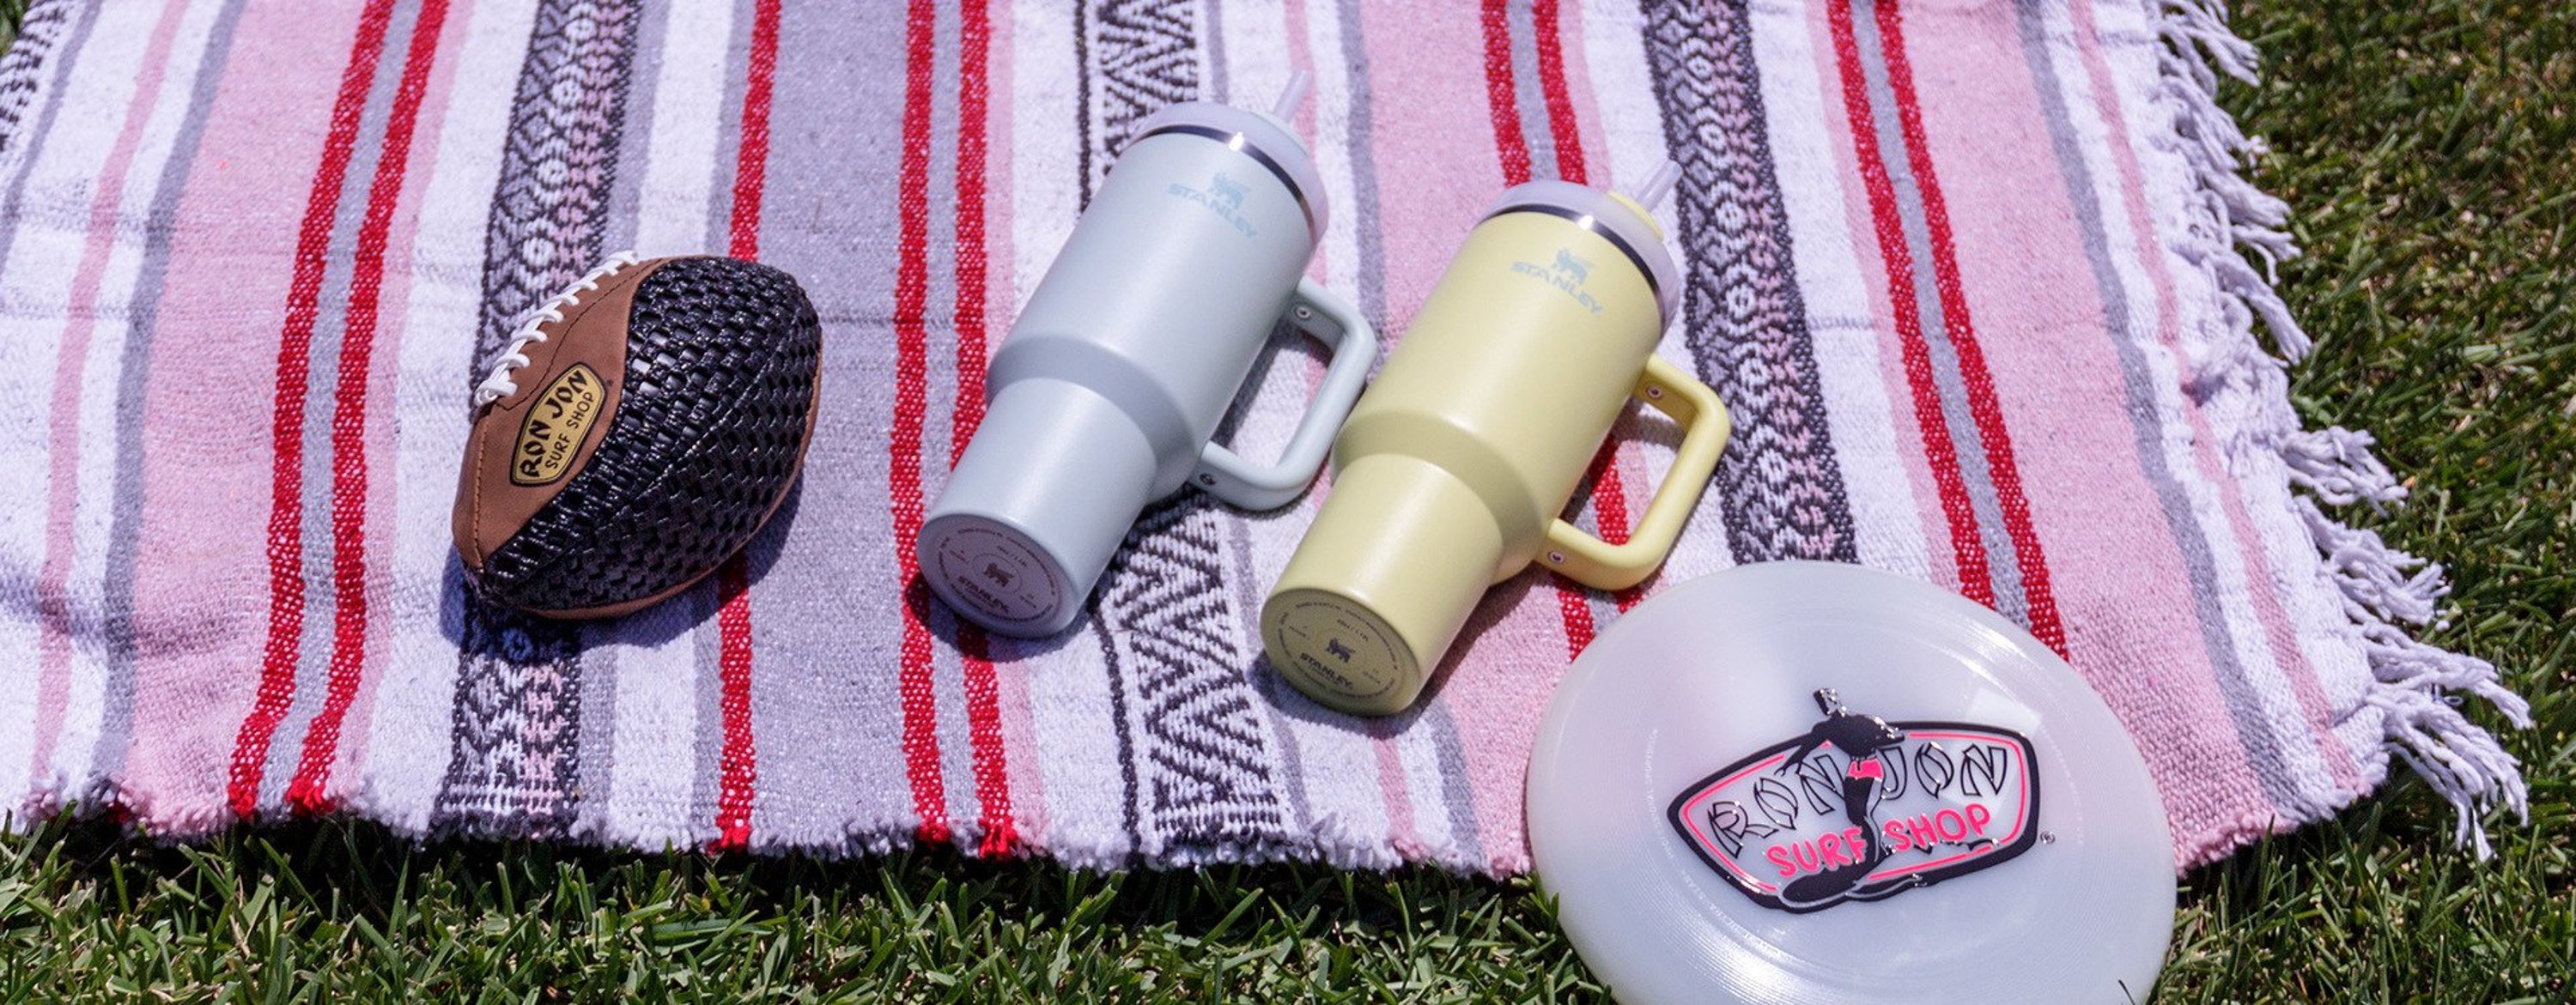 picnic blanket on grass with stanley mugs, football, and disc